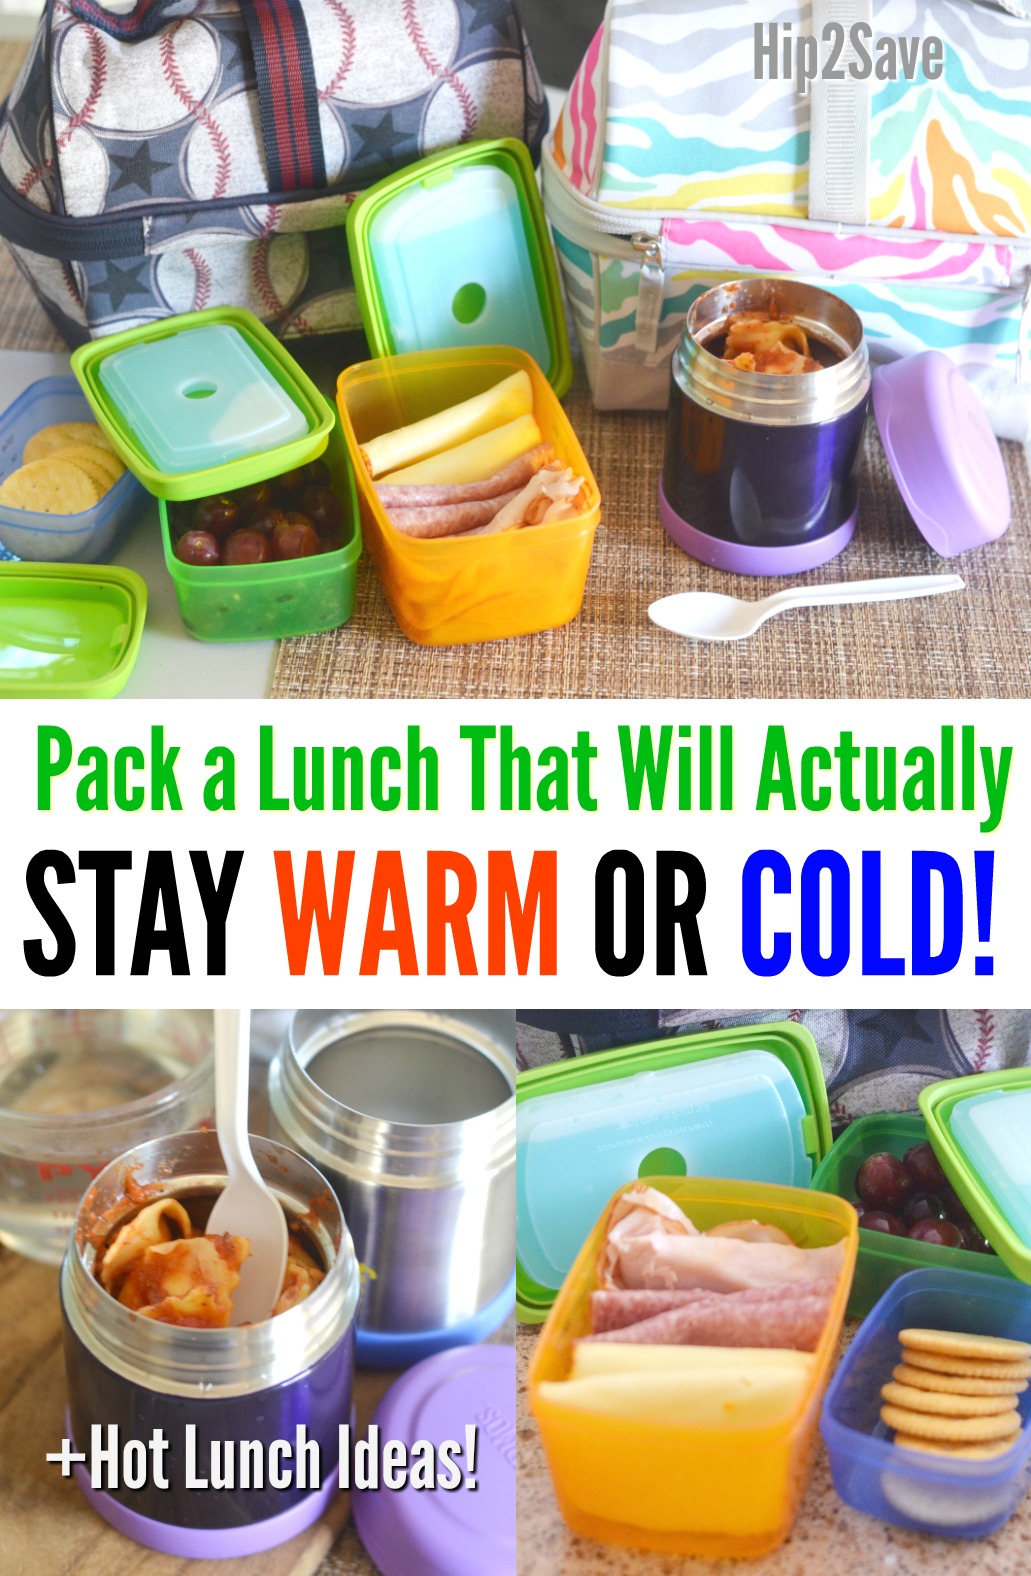 How to Keep Food Warm for Lunch